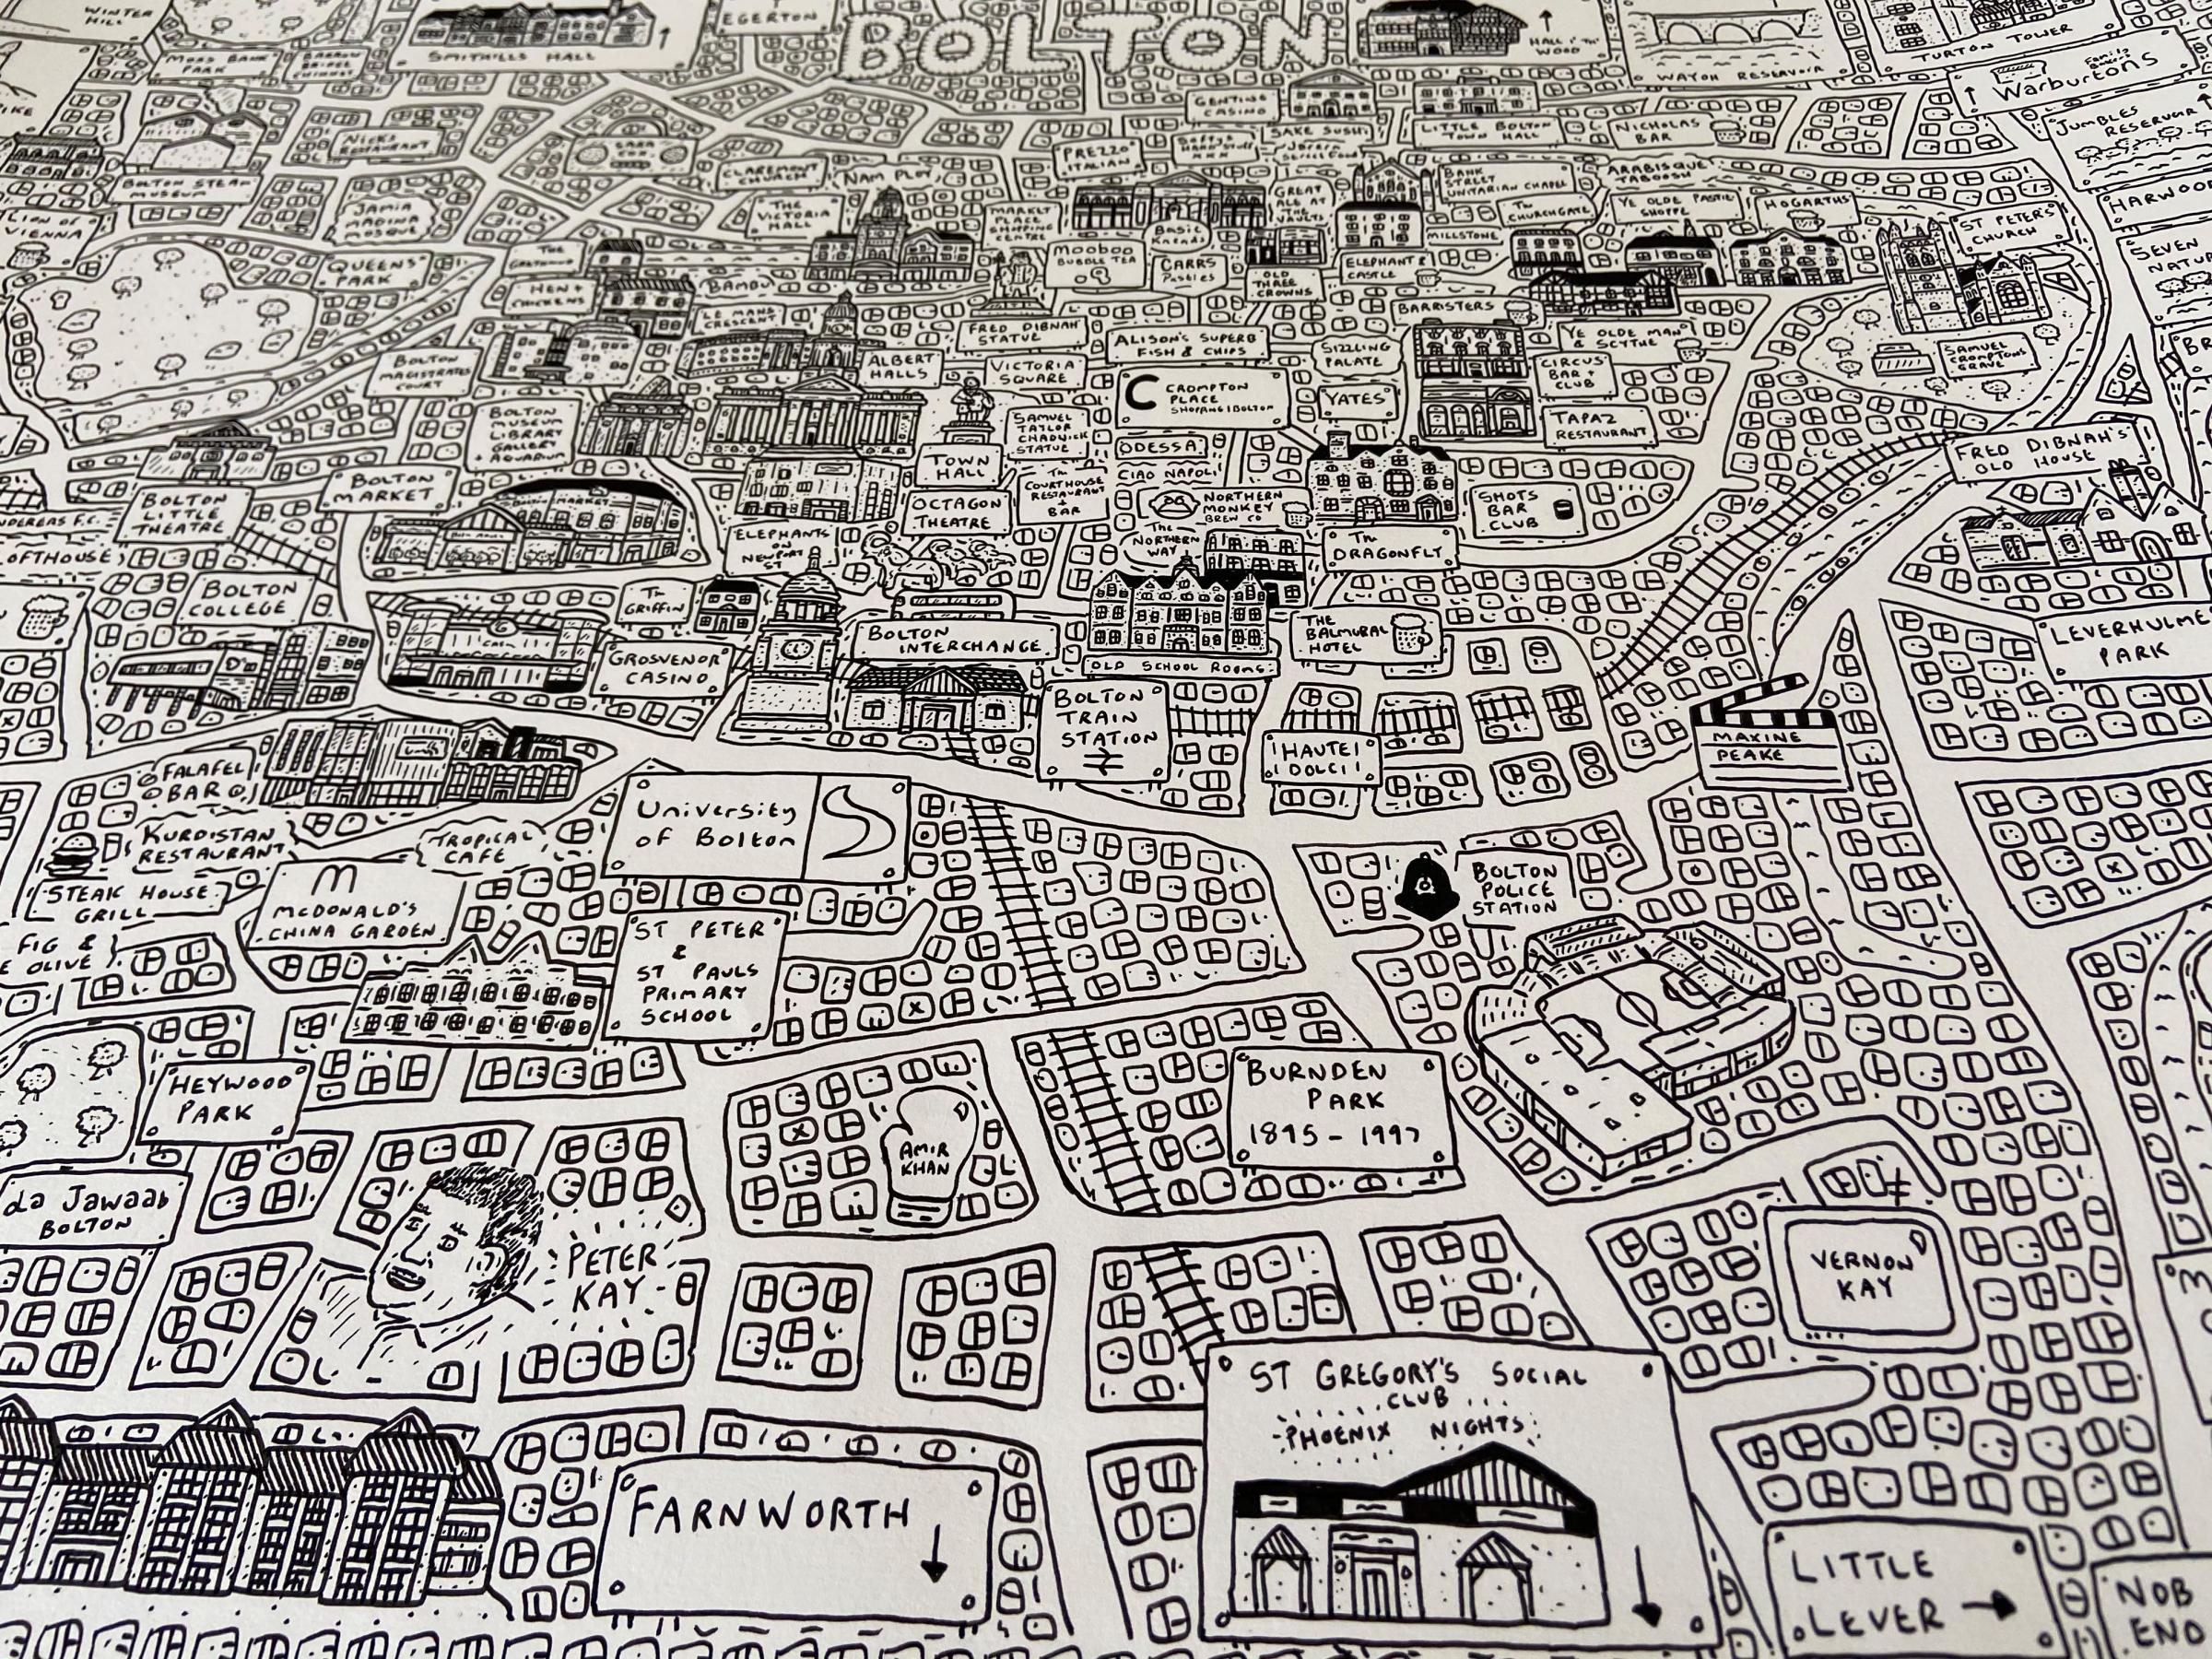 Bolton Doodle Map by artist Dave Draws